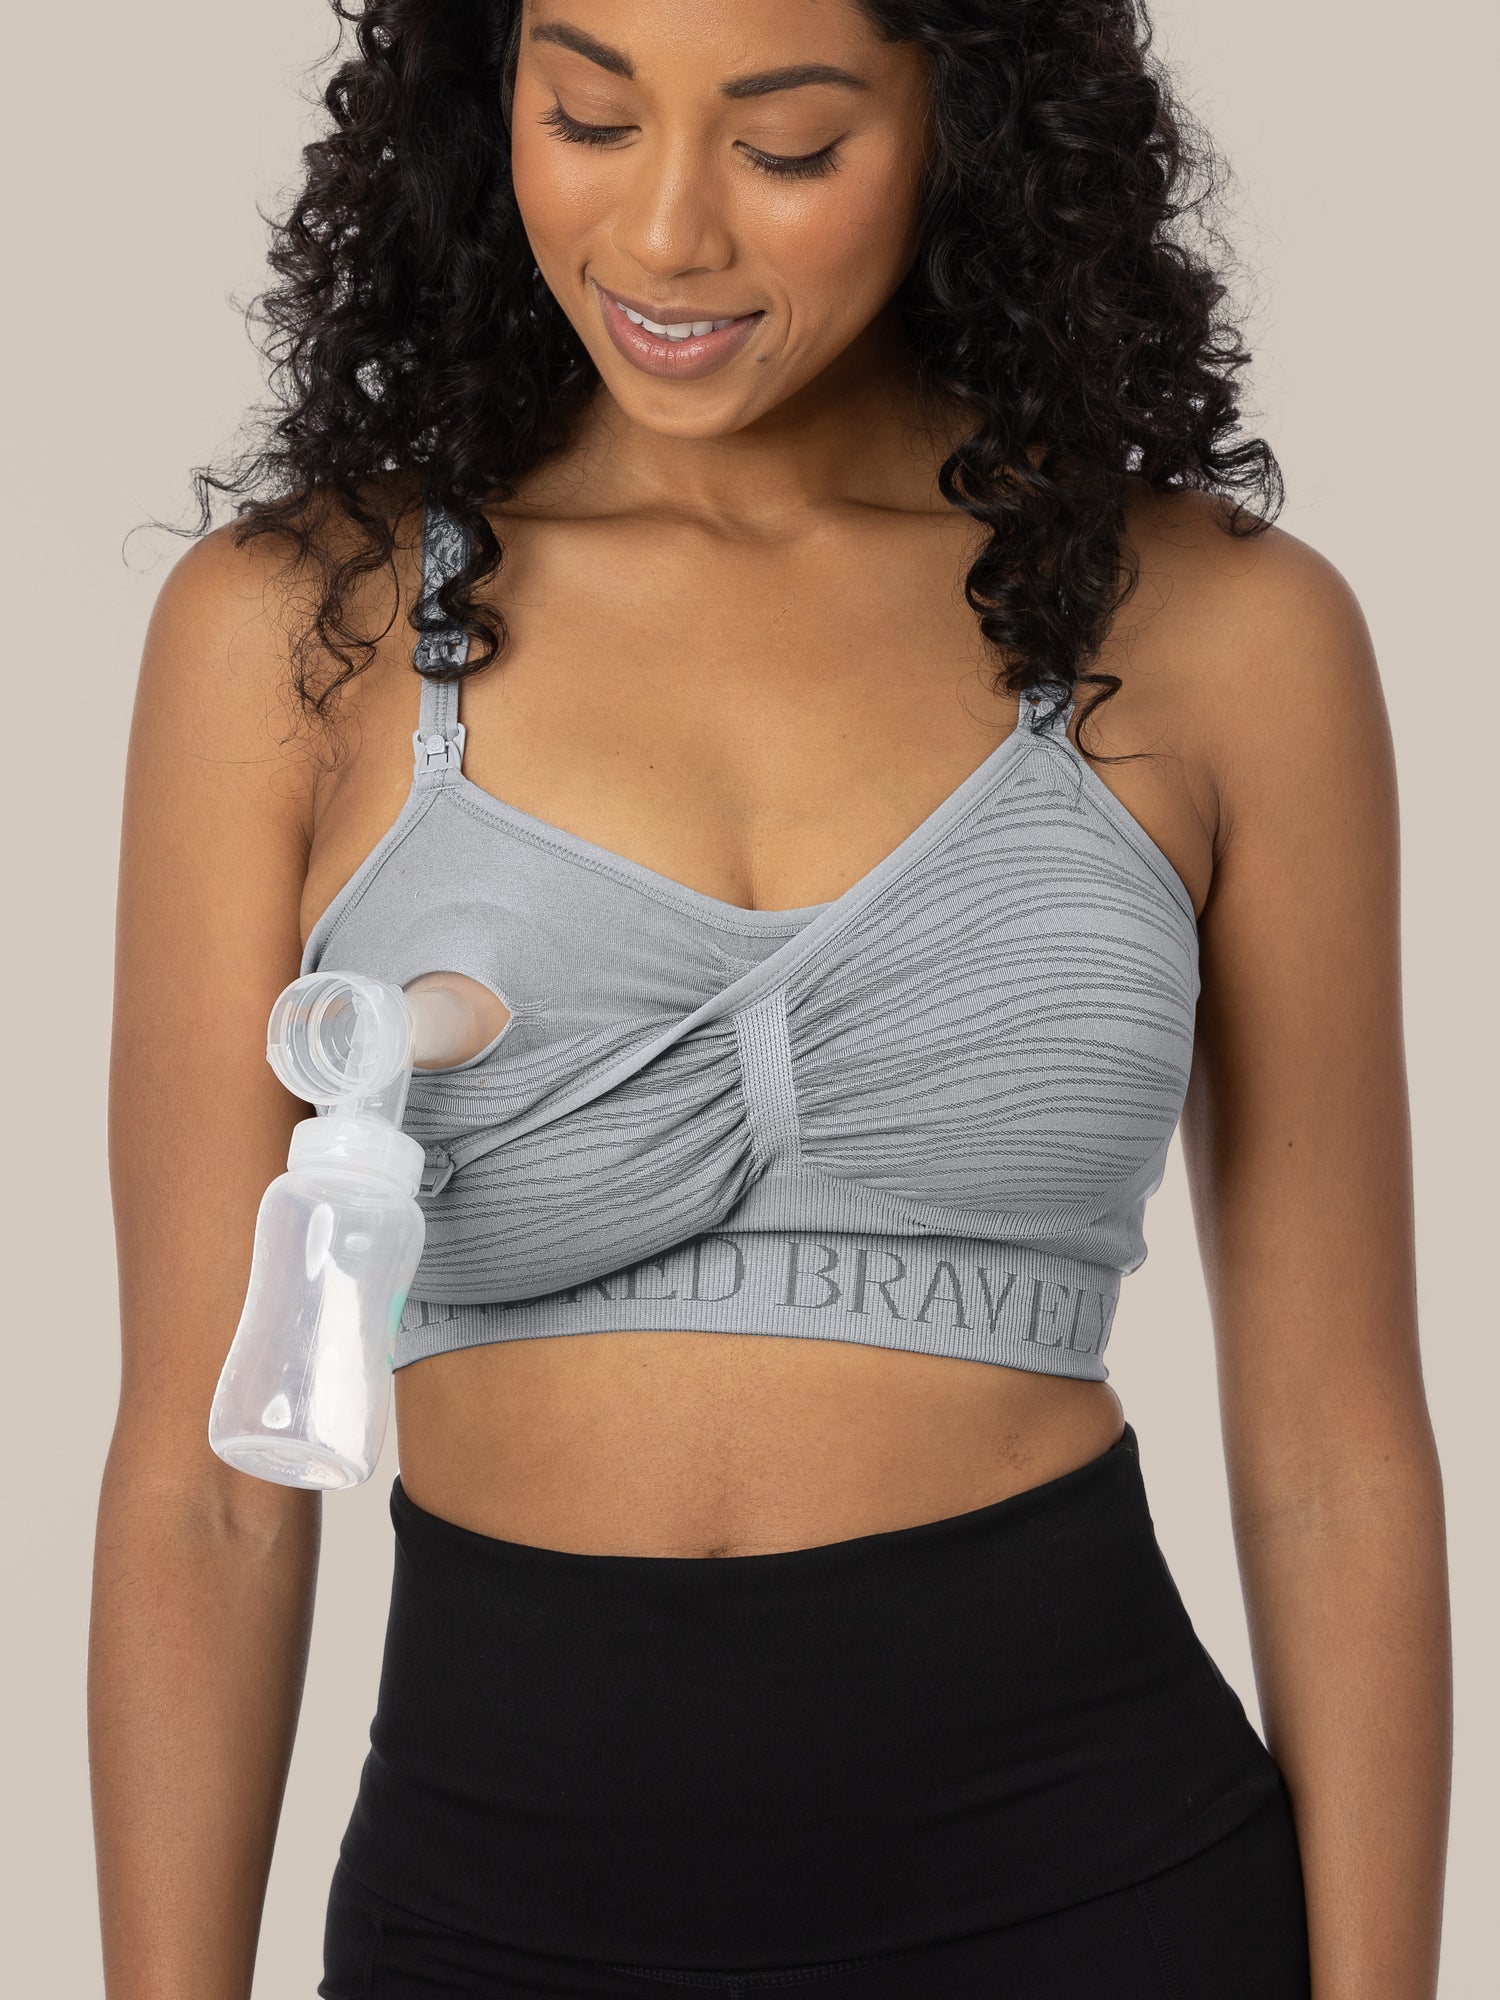 Model wearing the Sublime® Hands-Free Pumping & Nursing Bra in Grey, showing the clip down pumping and nursing access.